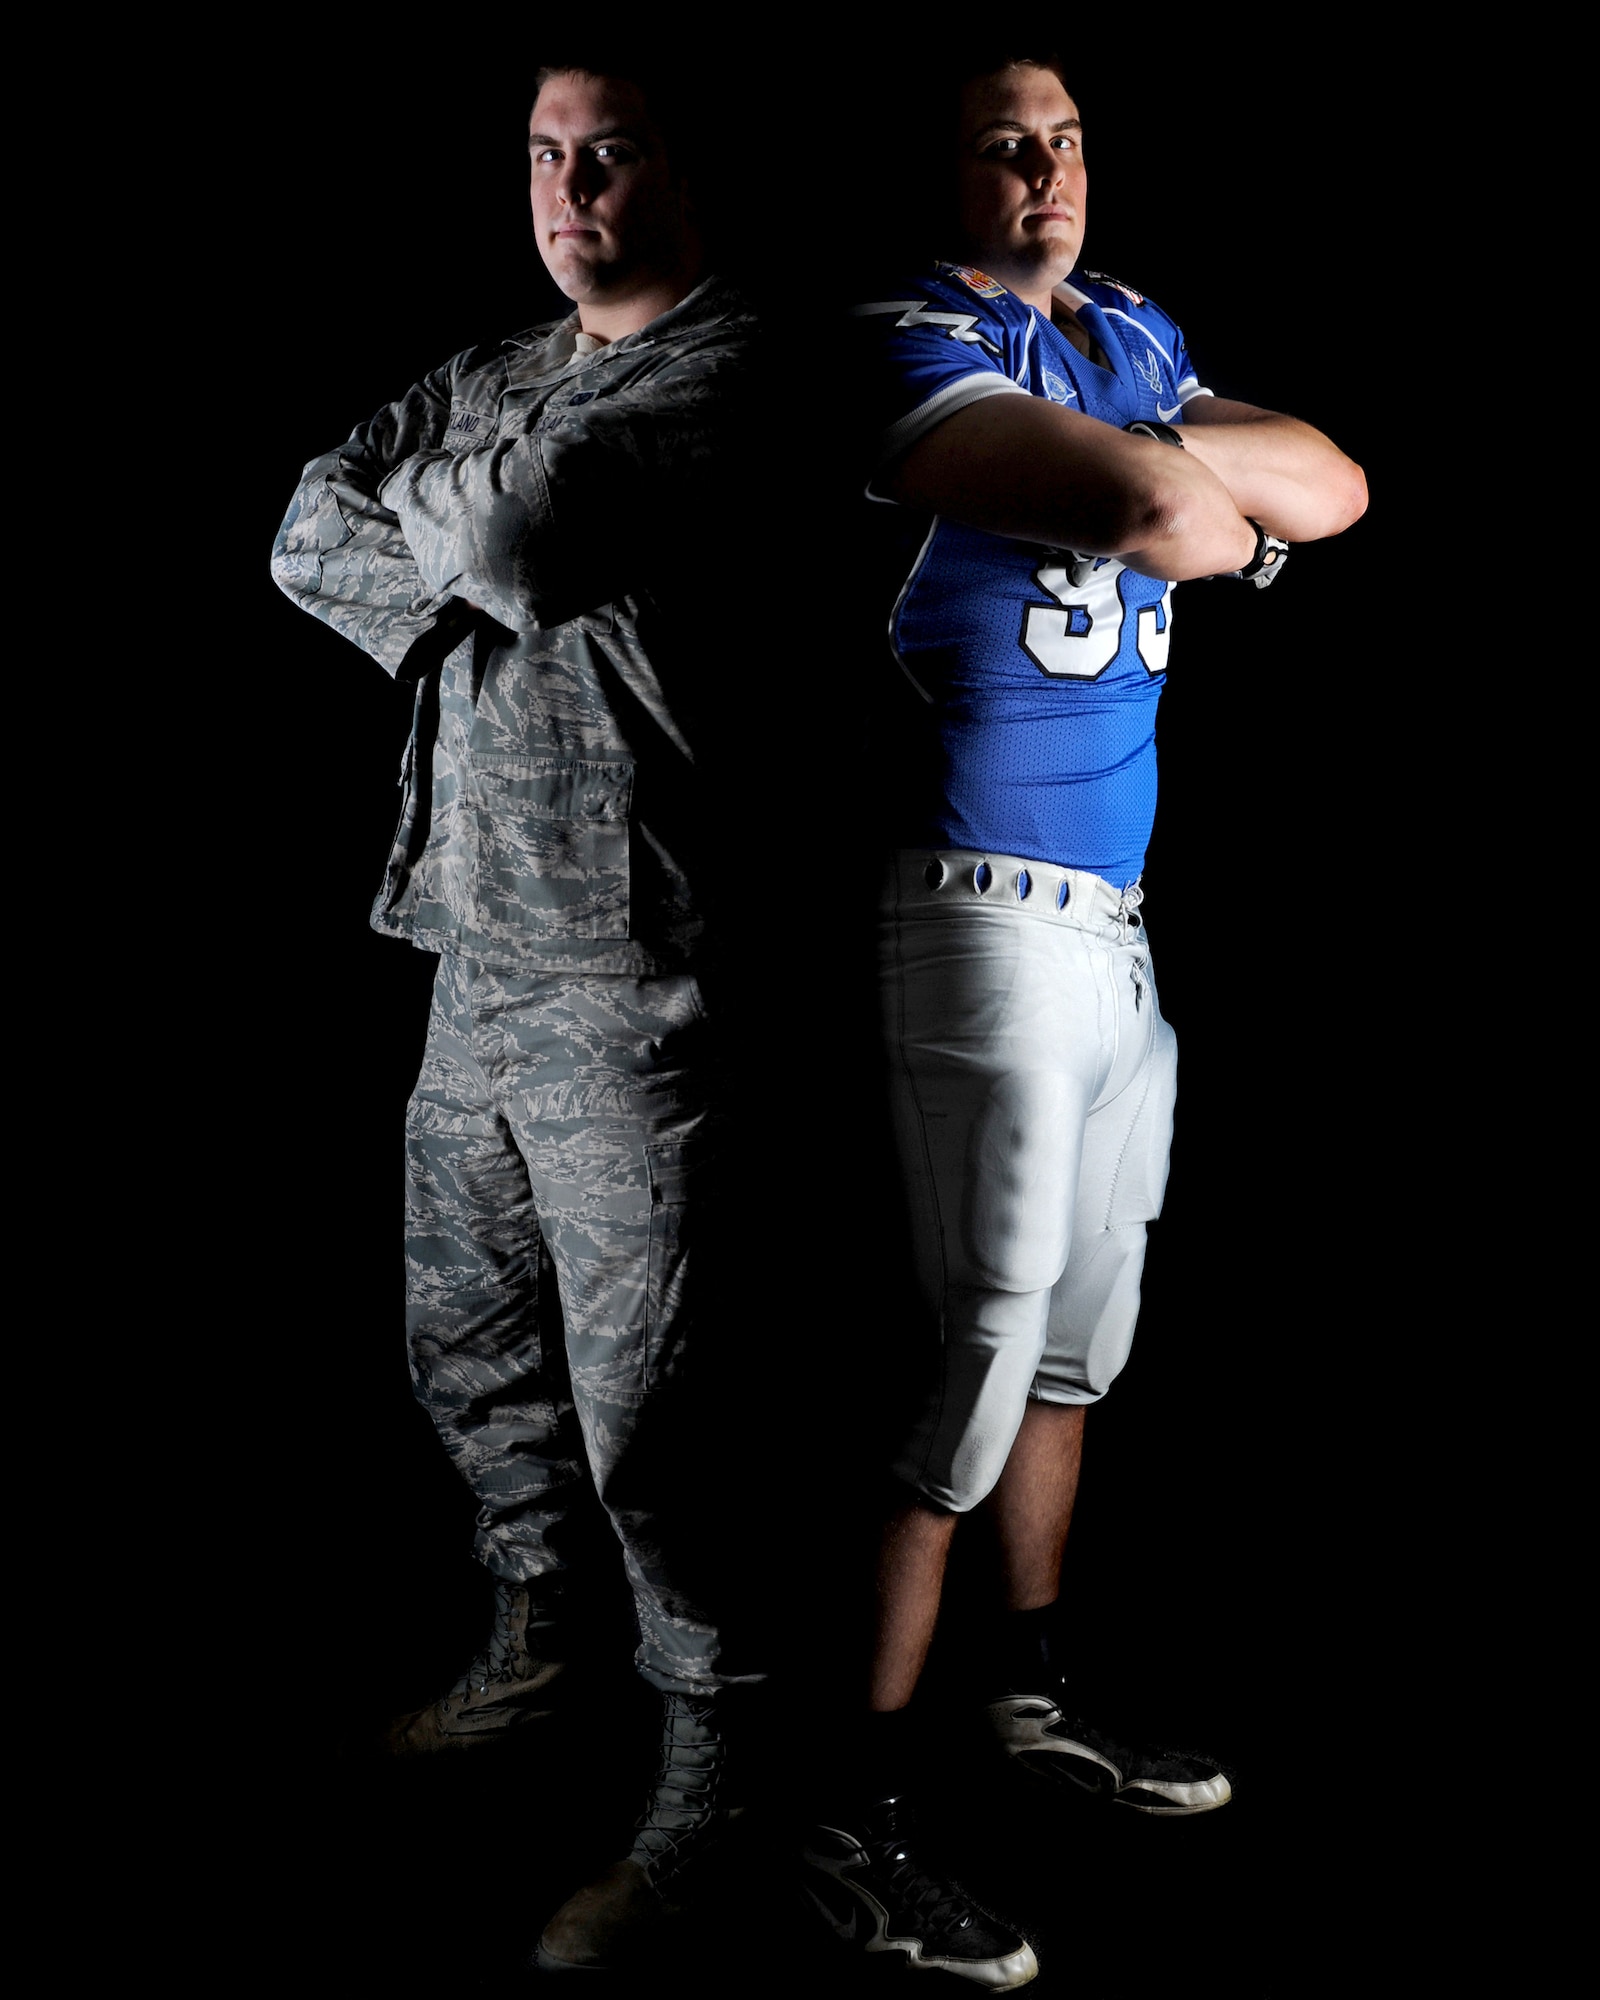 Second Lt. Ben Garland, 375th Air Mobility Wing Public Affairs chief of media operations, is pictured in his military uniform and Air Force football gear. Garland has served as a dedicated officer in the United States Air Force and has been approved for release from active duty. He is now at Denver Broncos offseason training camps where he is taking his opportunity to play pro football. (U.S. Air Force photo illustration/Staff Sgt. Brian J. Valencia)